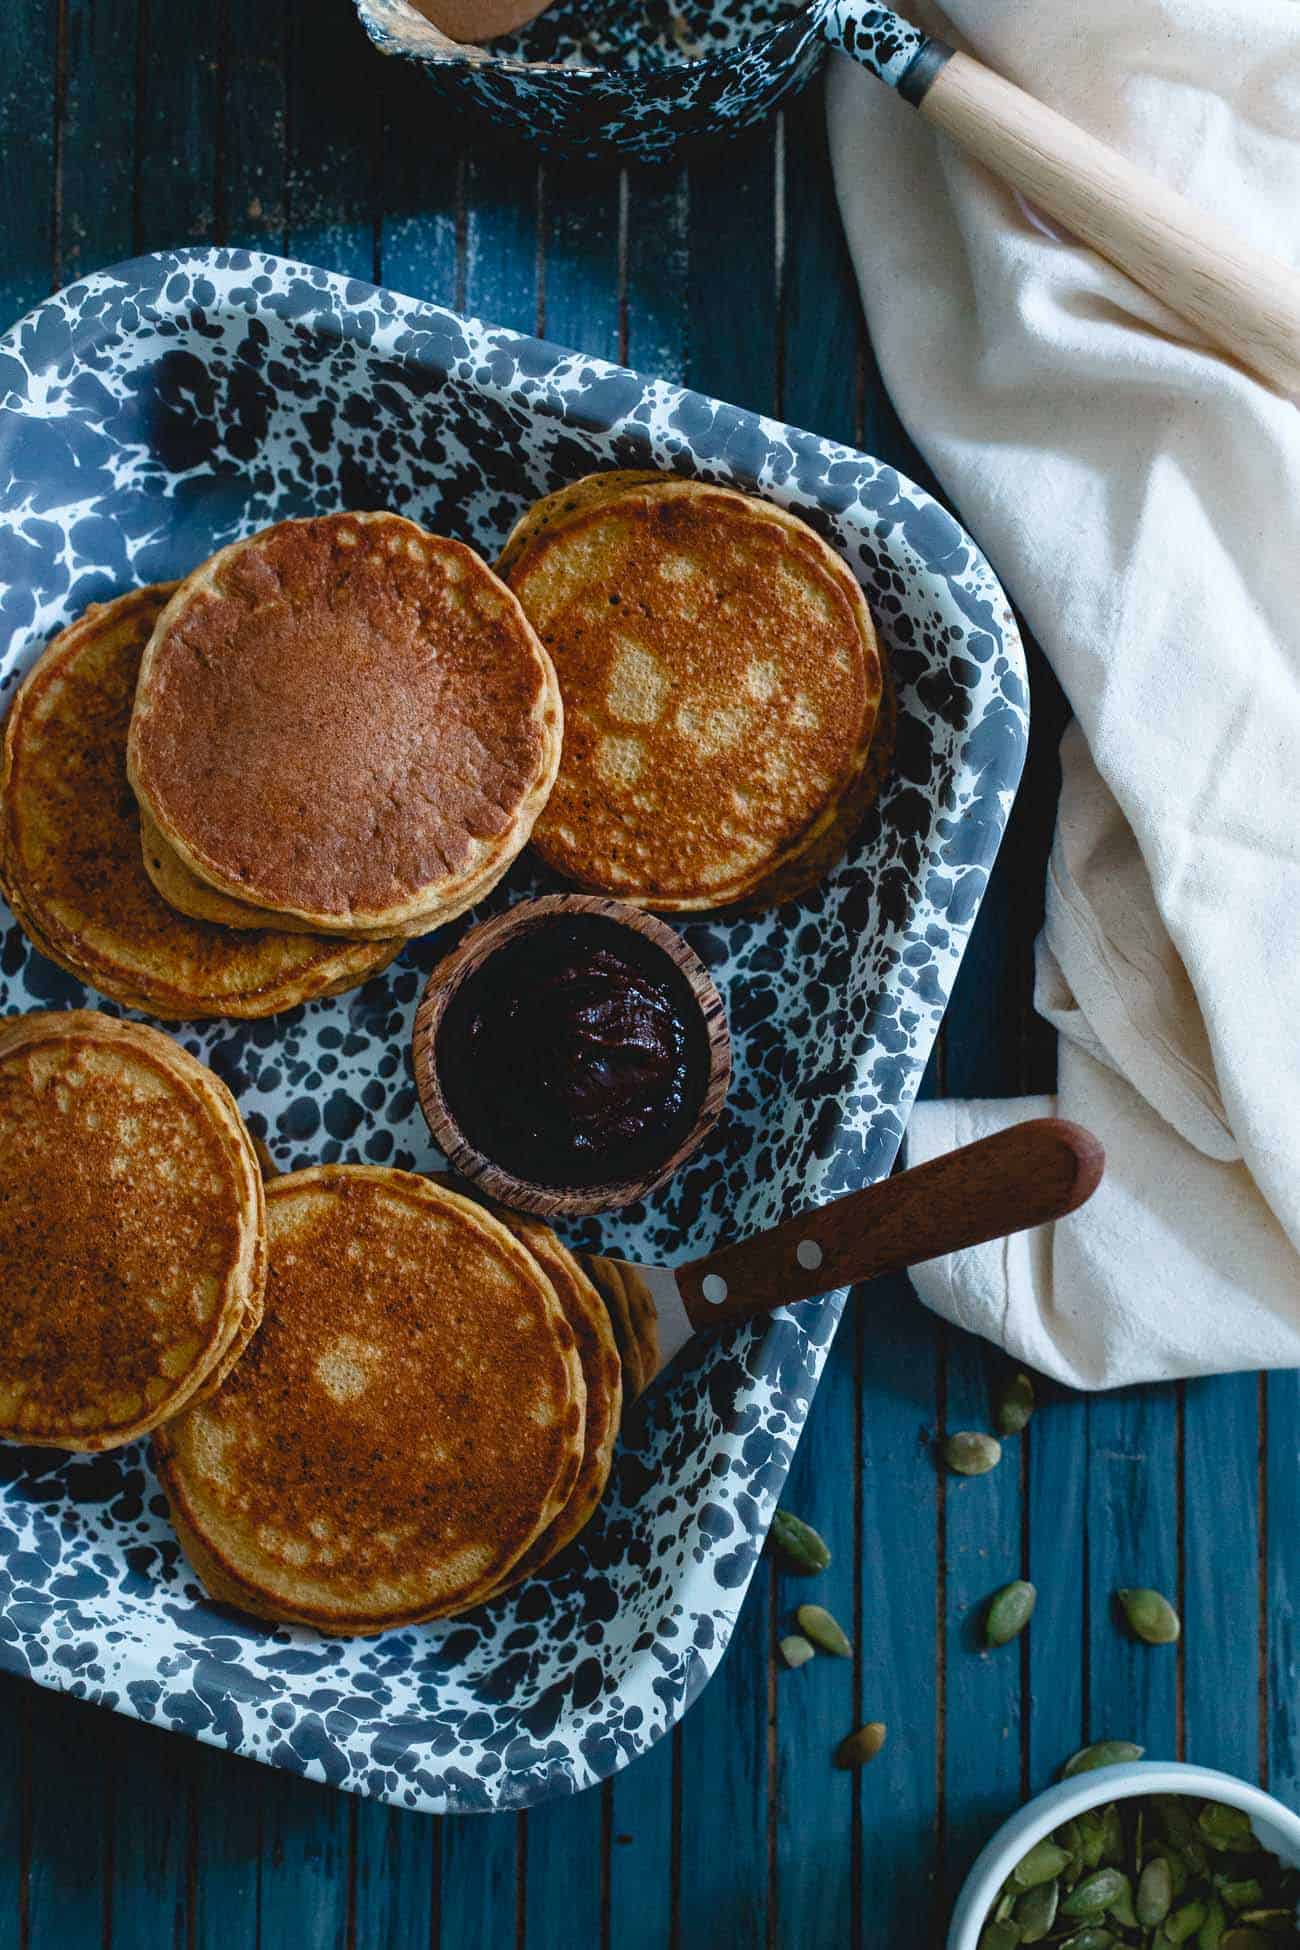 These pumpkin protein pancakes are a simple, fall recipe for pumpkin pancakes packed with protein to help keep you full longer. A healthy start to your day!